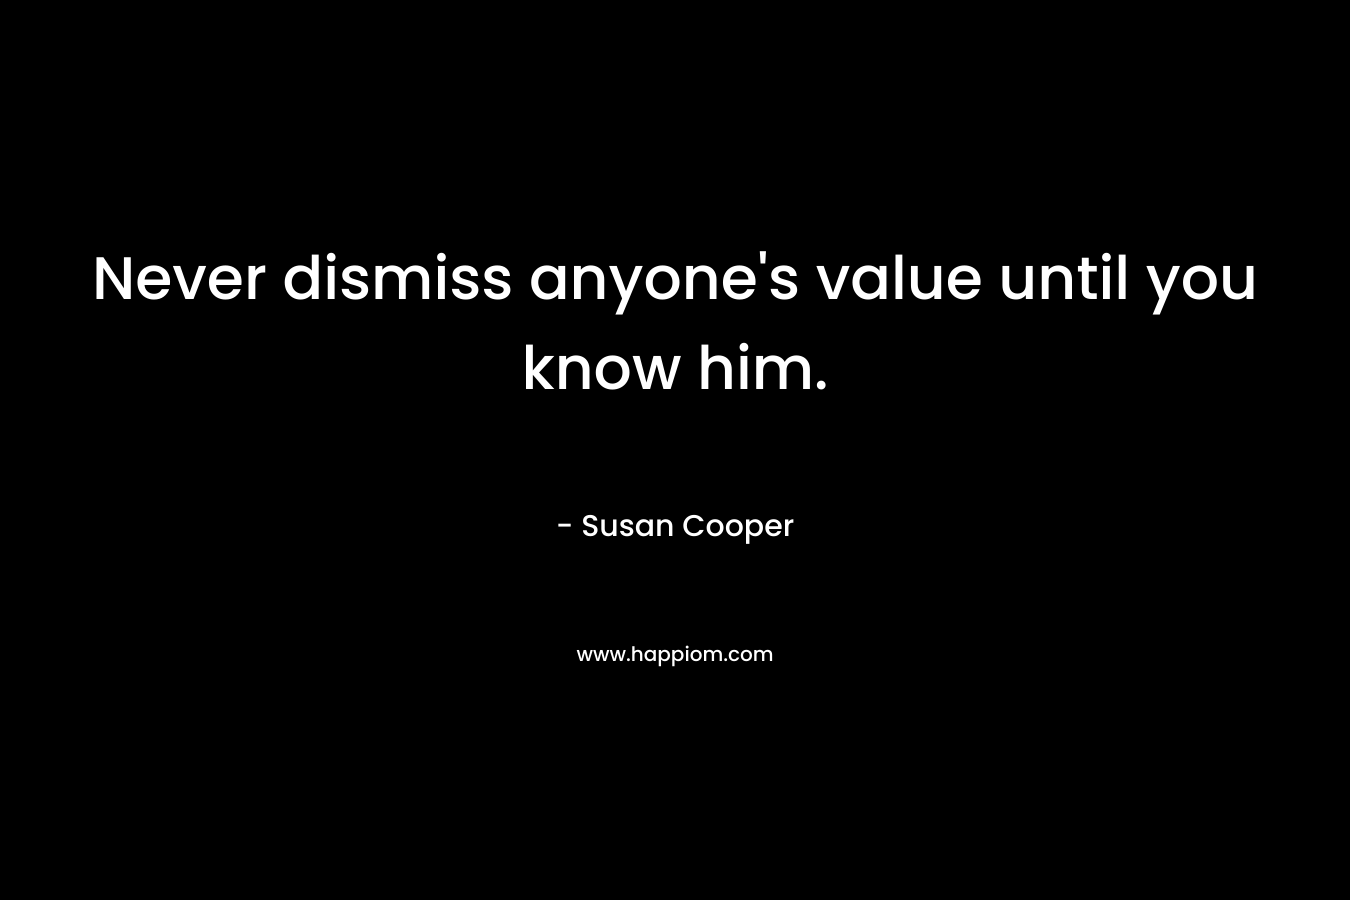 Never dismiss anyone’s value until you know him. – Susan Cooper